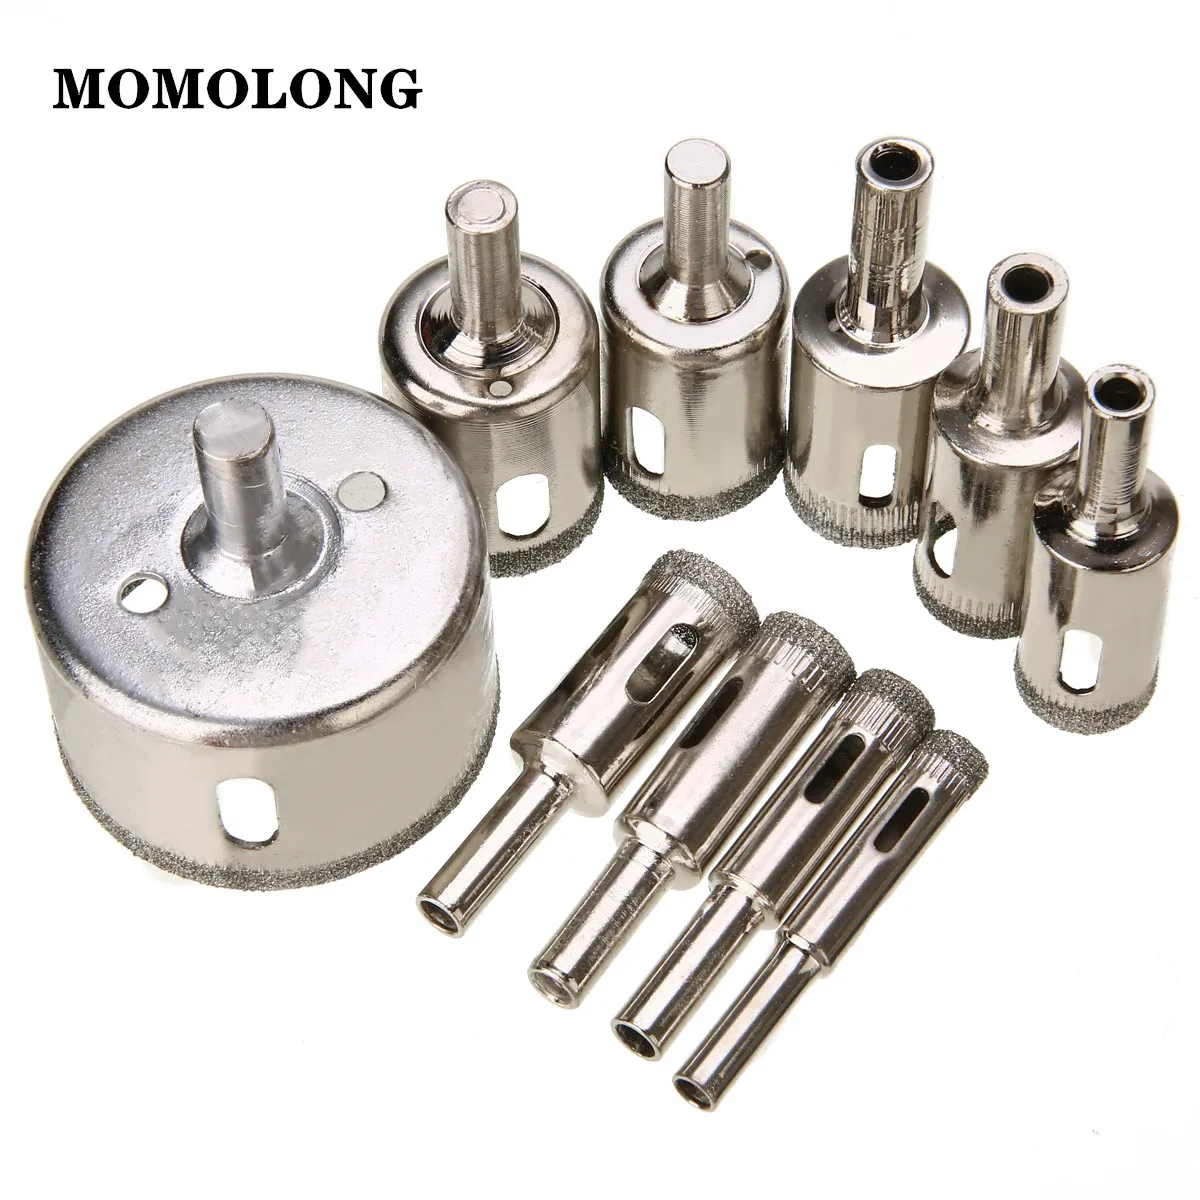 10/15/30Pcs Diamond Coated Drill Bit  Glass Ceramic Hole Saw  3-50mm Drilling Bits For Tile Marble Glass Ceramic For Power Tools 1pcs 20mm 22mm 25mm 28mm 30mm 35mm diamond coated drill bit tile marble glass ceramic hole saw drilling bits for power tools